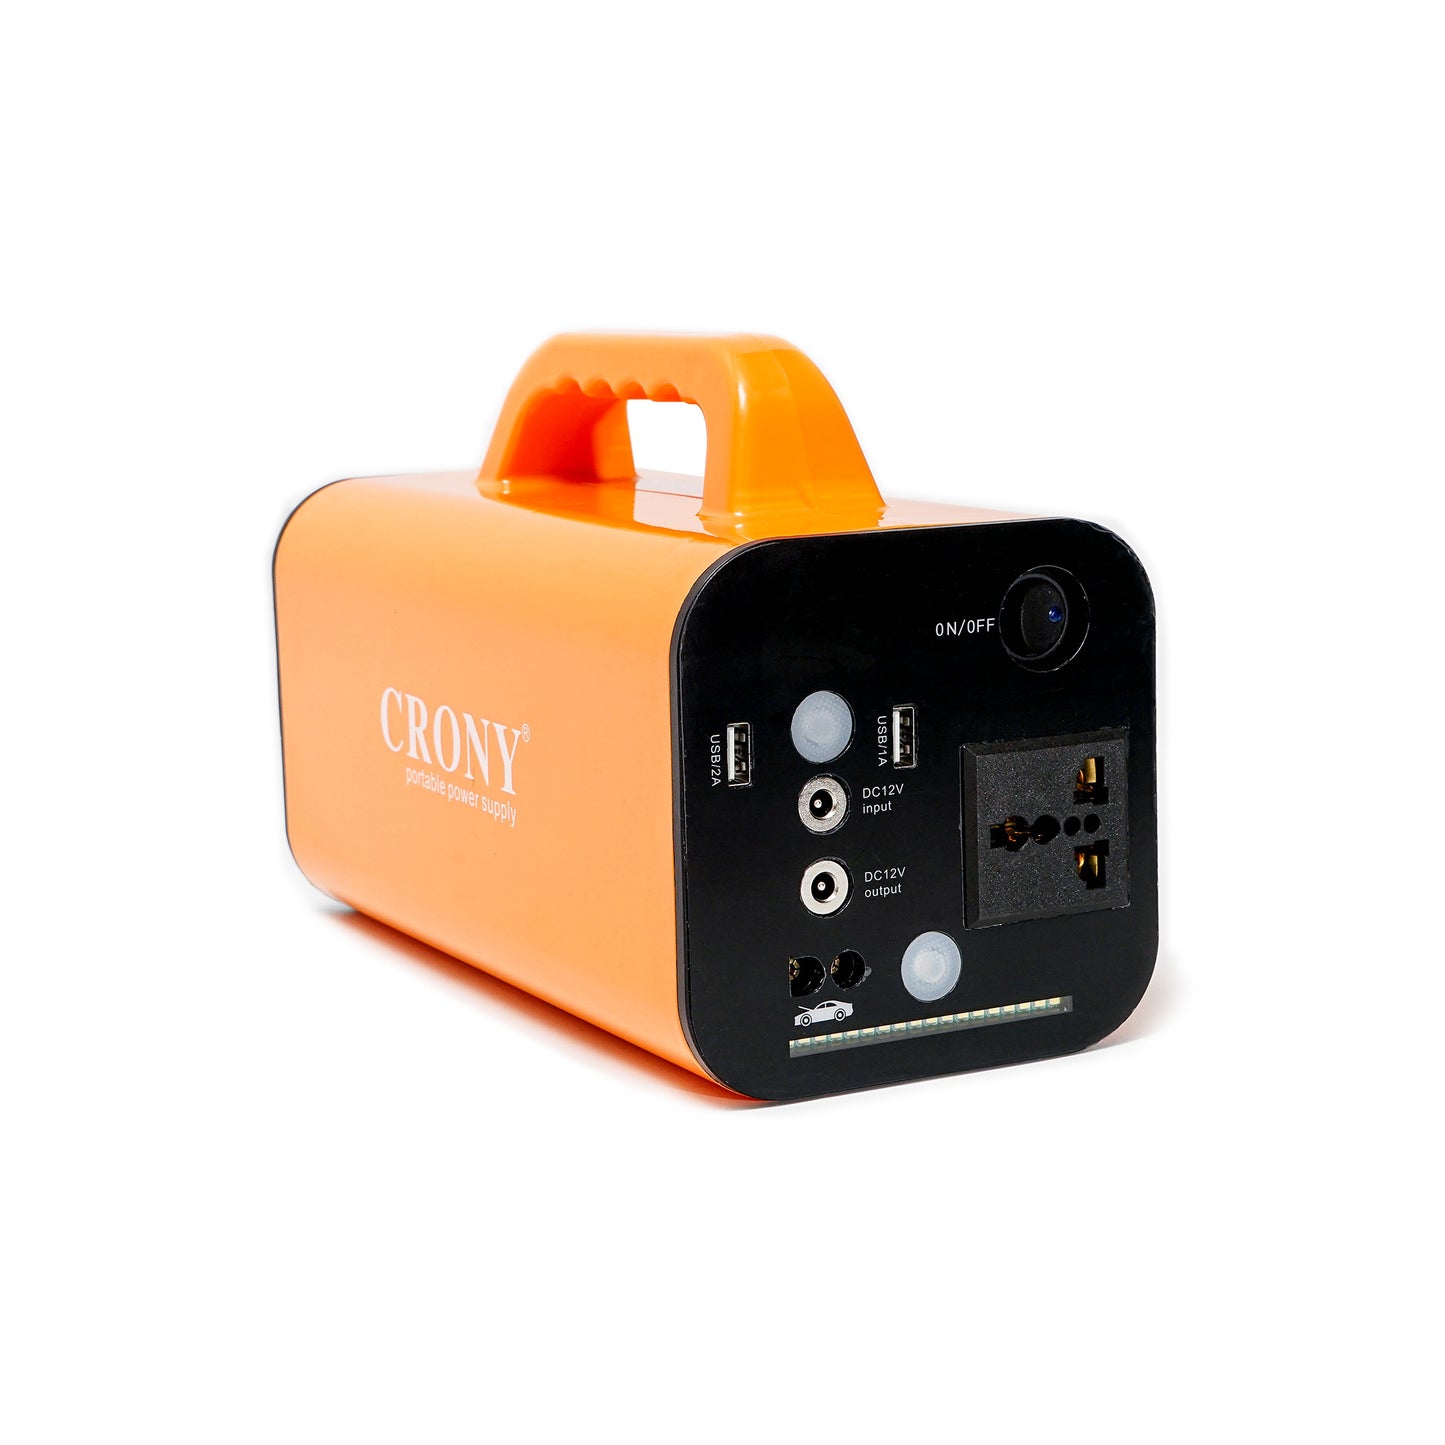 CRONY K36 Portable Power Station with Super Jumper Starter 500W